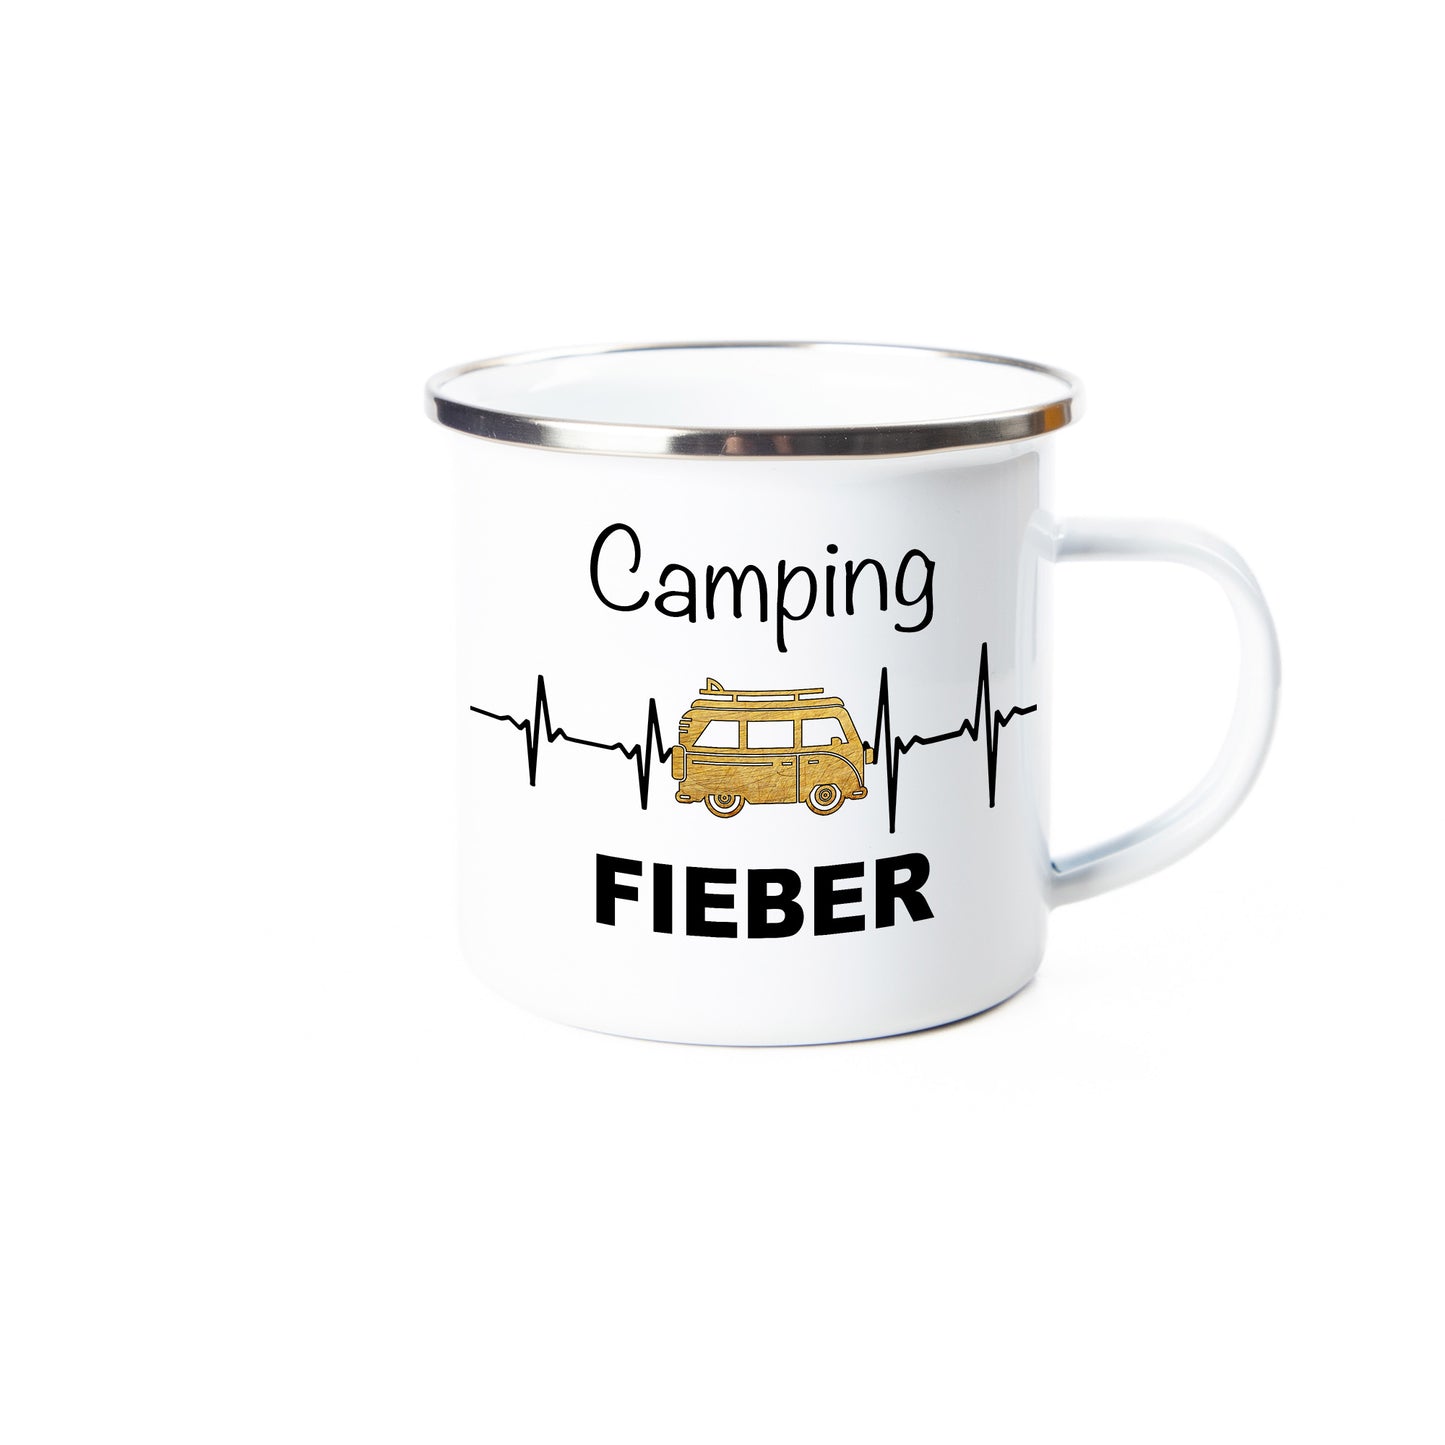 Tasse - Campingfieber - Emaille (Silber)